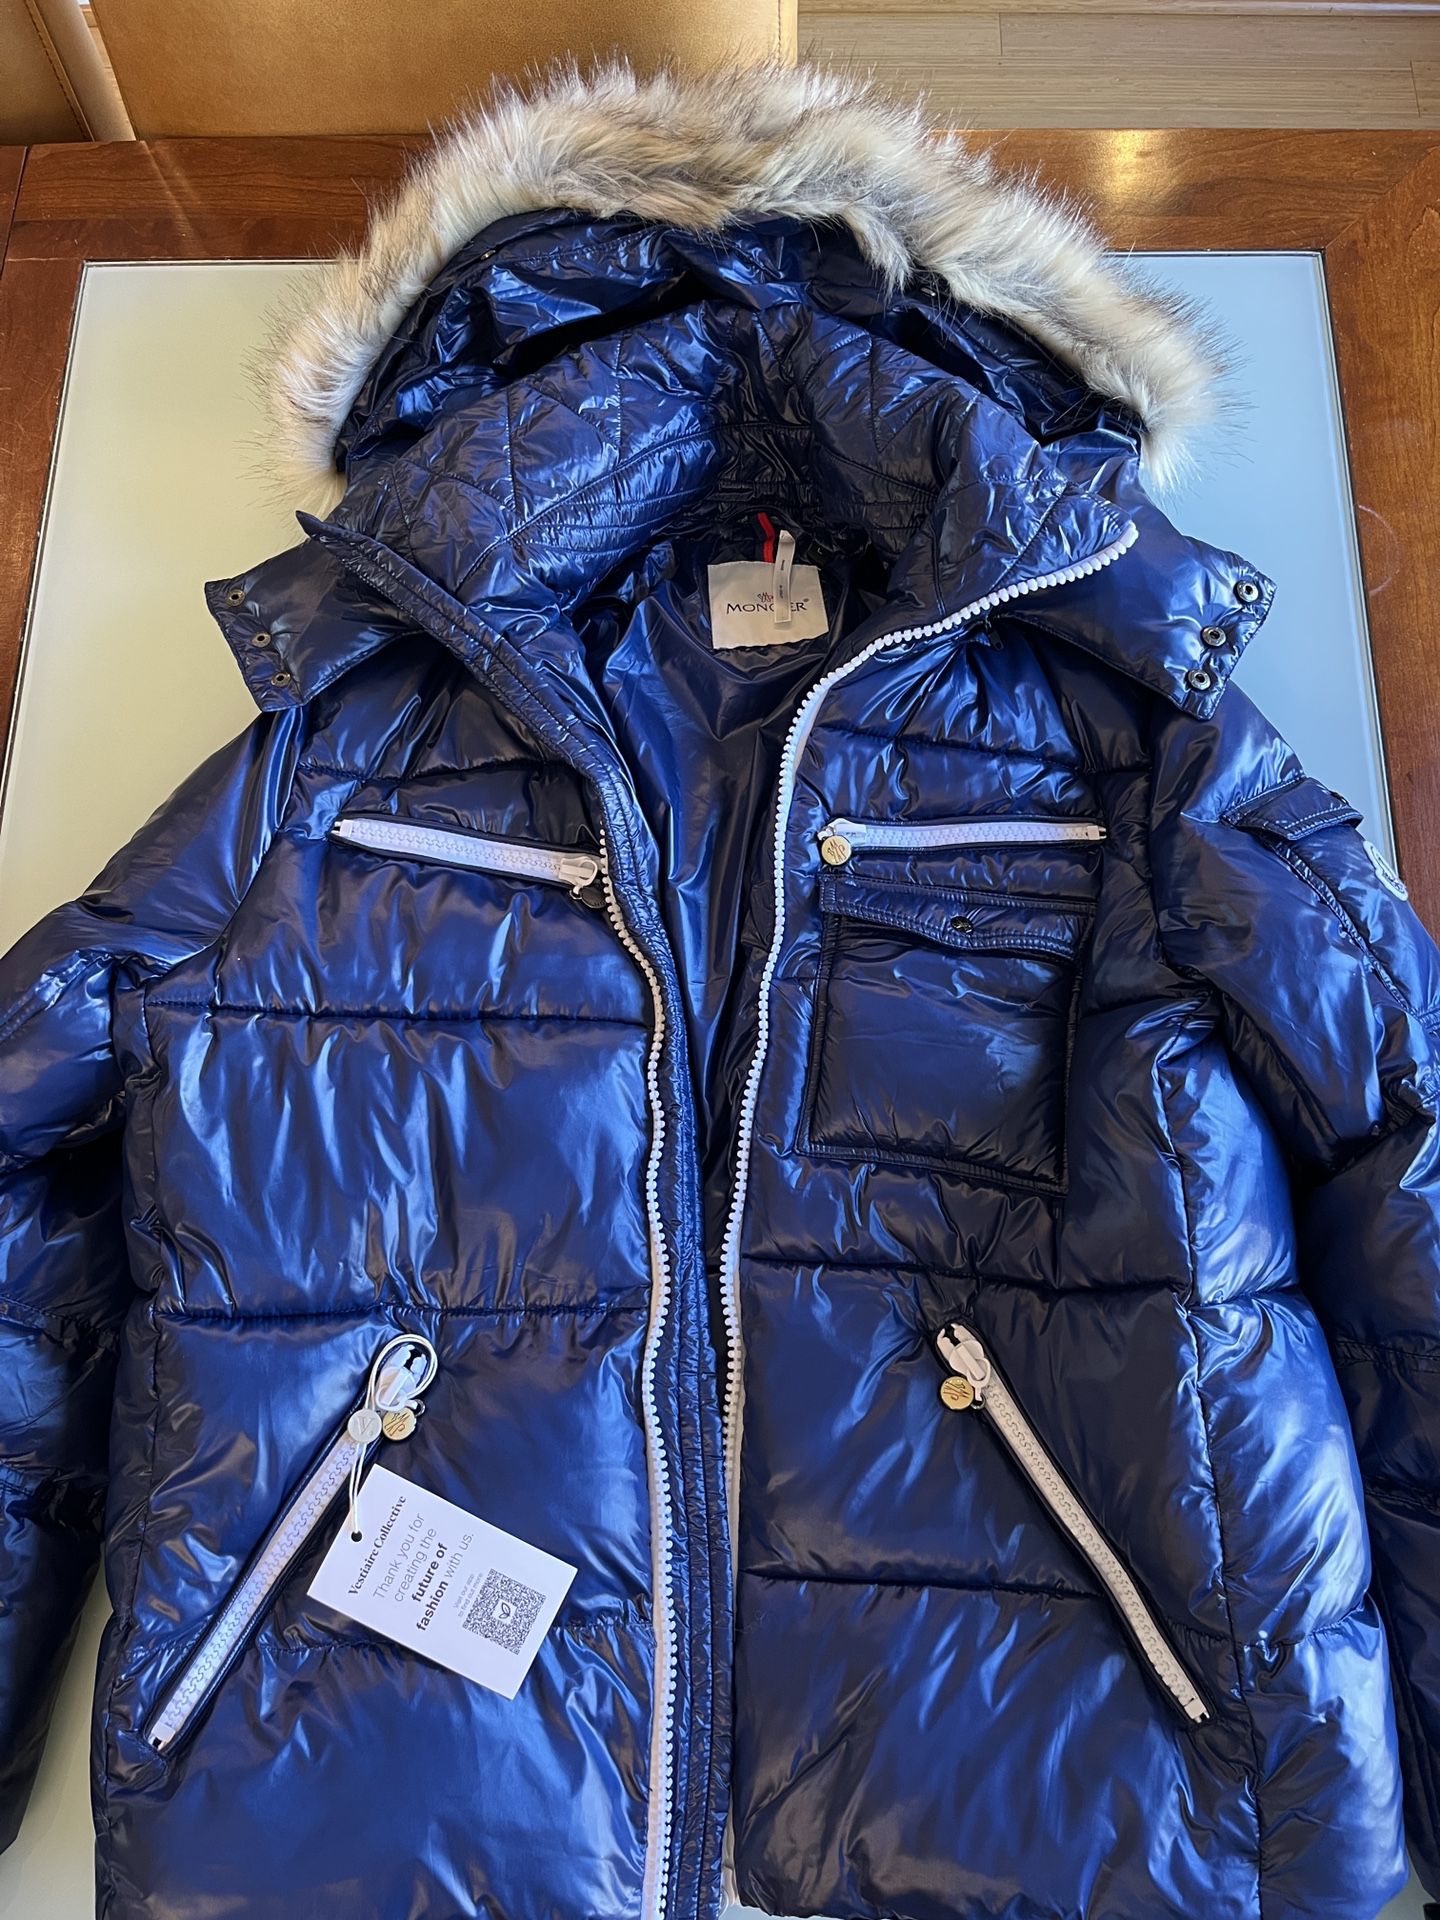 Moncler Winter Parka For Men Size L Used Condition 